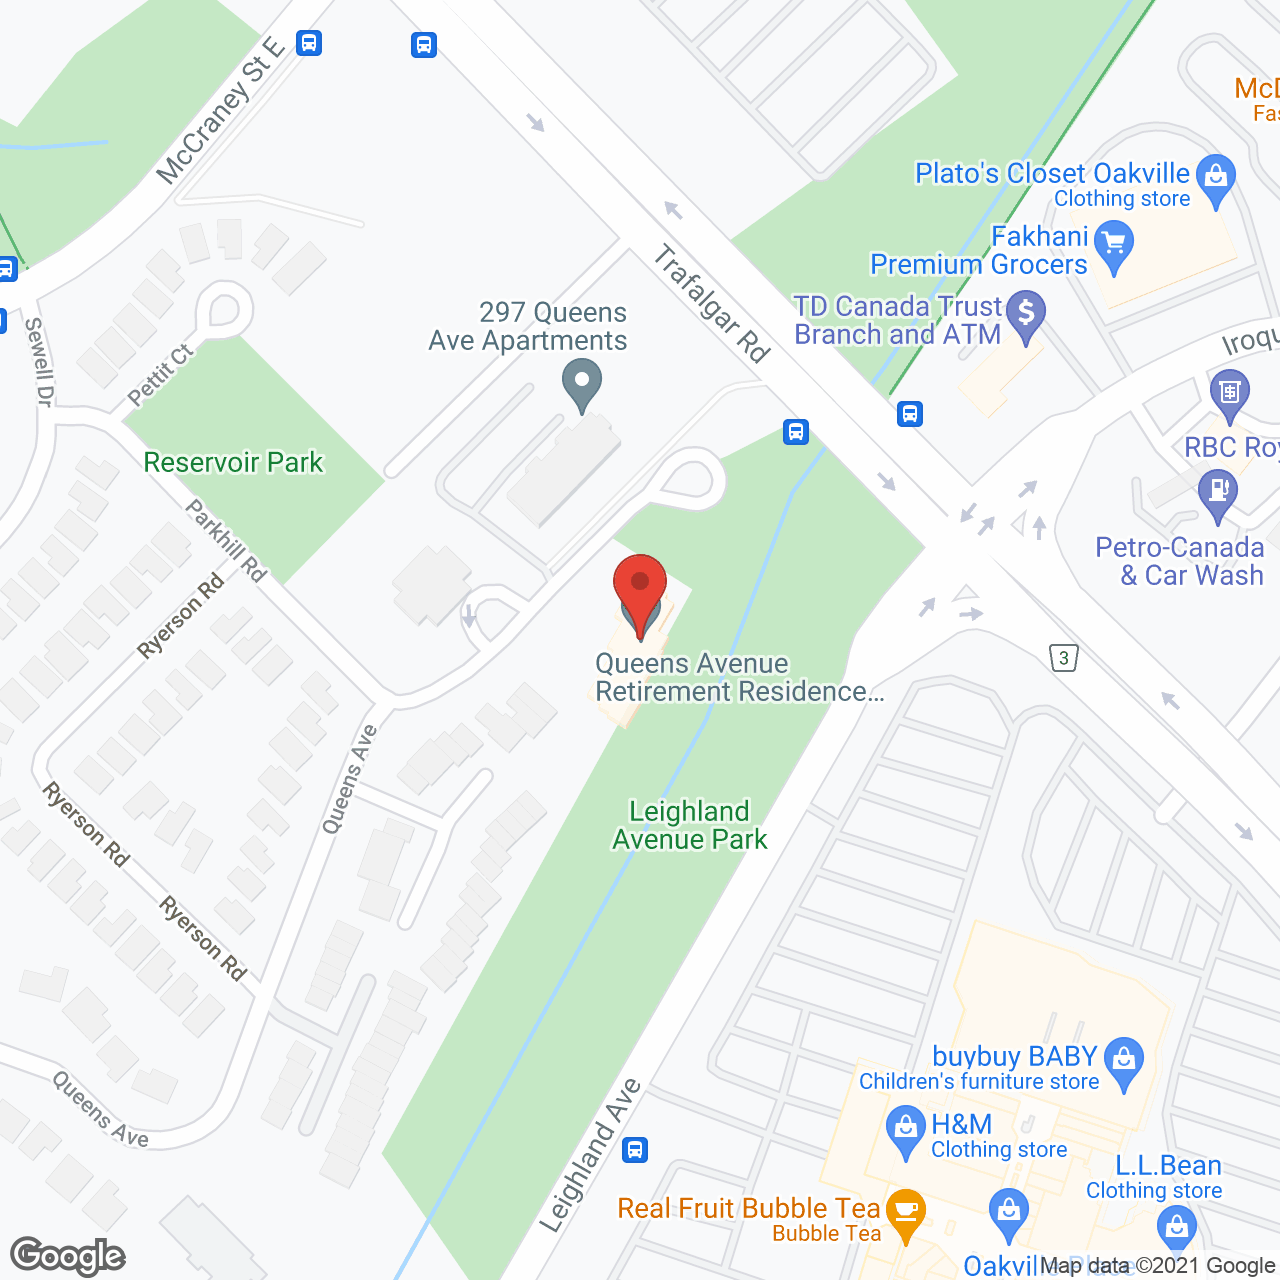 Queens Avenue Retirement Residence in google map